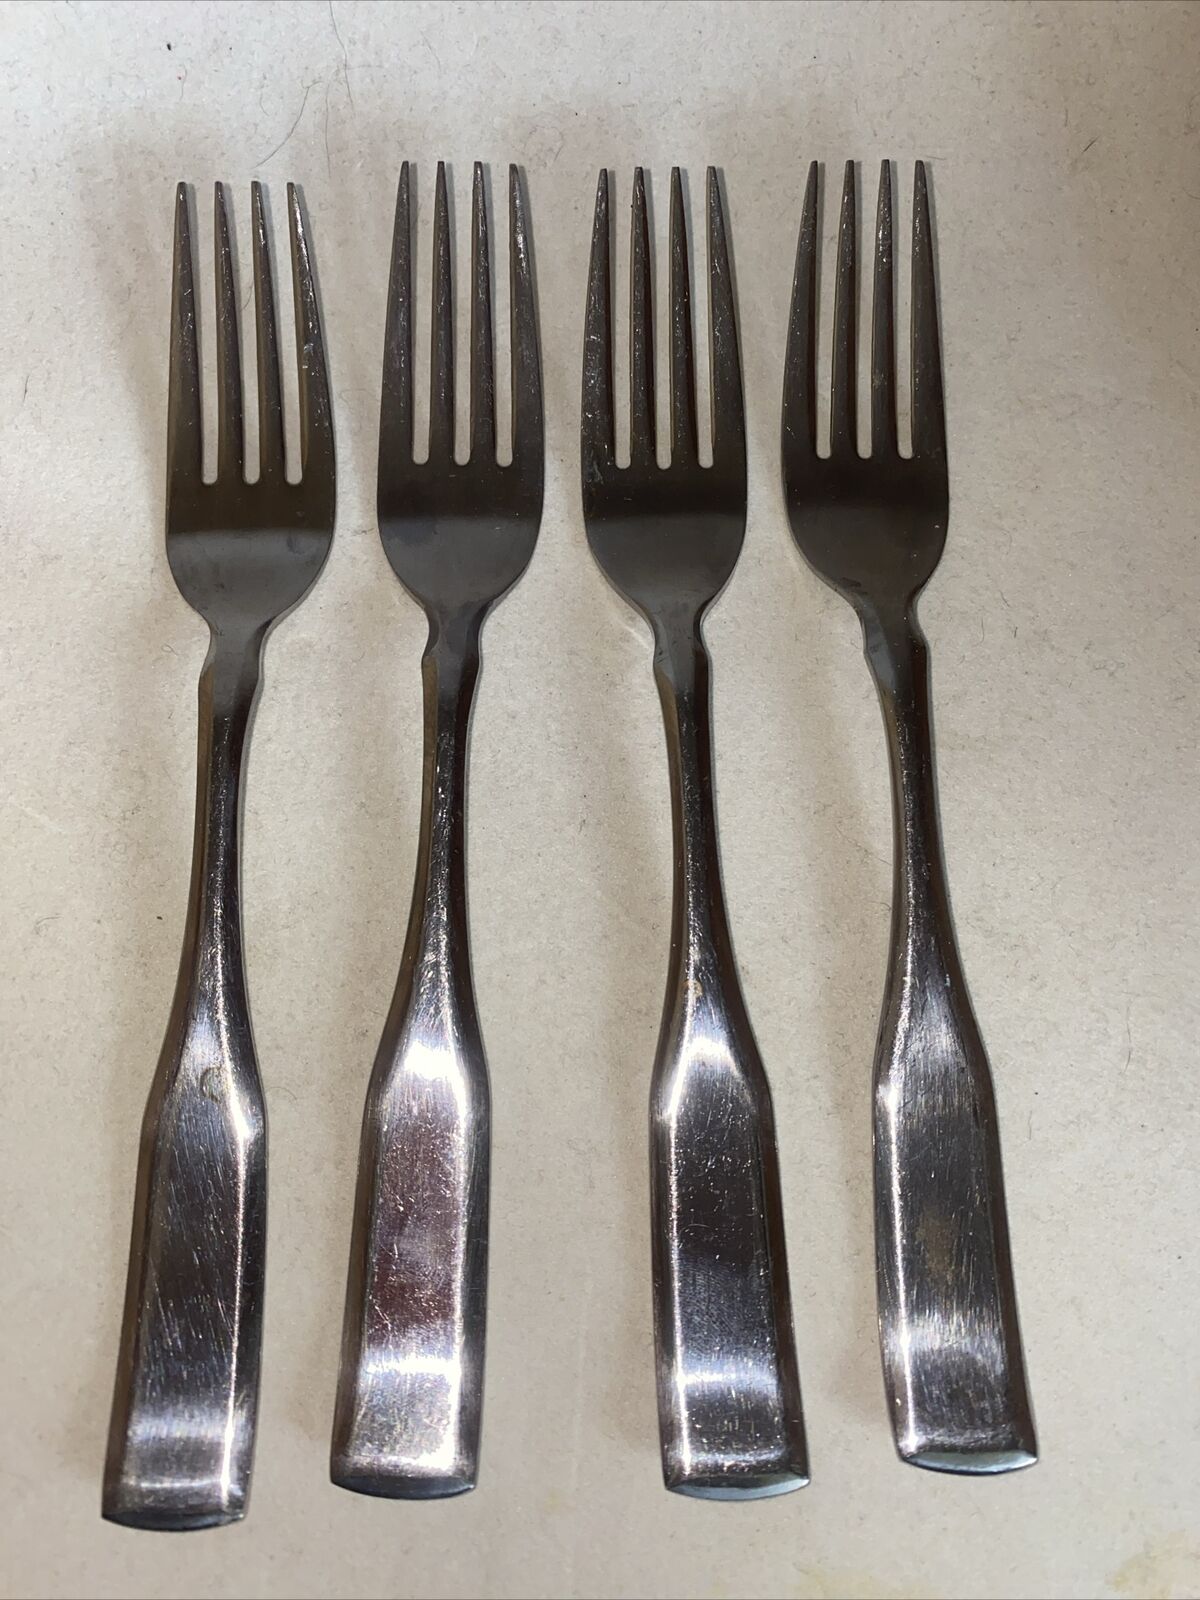 4-Reed & Barton Select Stainless TUCKAHOE Salad Forks